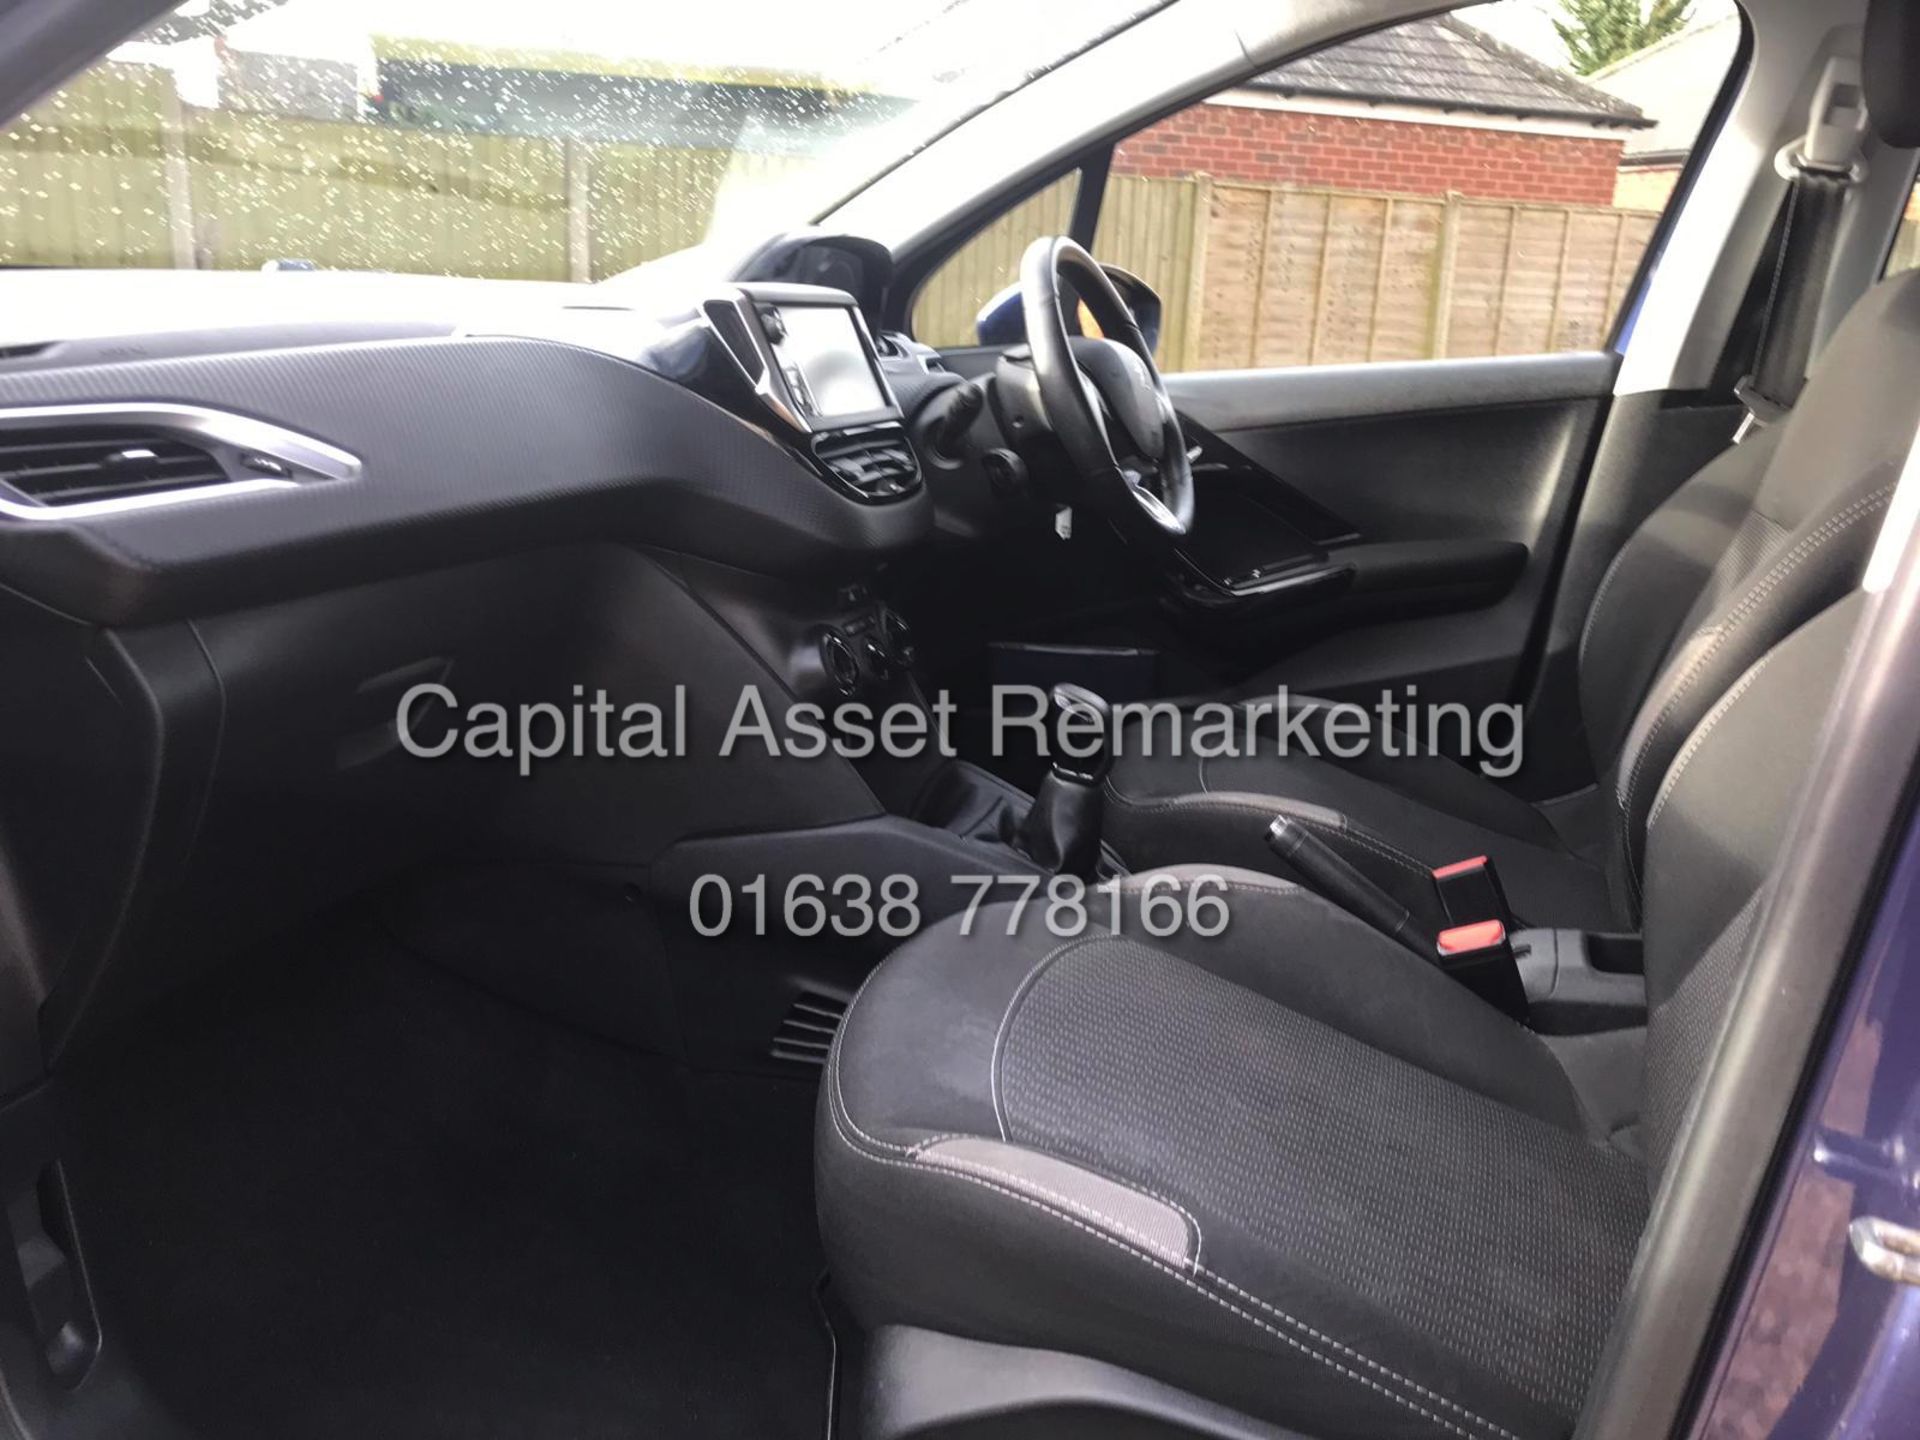 (ON SALE) PEUGEOT 208 "ACTIVE" PETROL MODEL - 2016 REG - 1 KEEPER - AIR CON - GREAT SPEC - LOOK!!! - Image 17 of 17